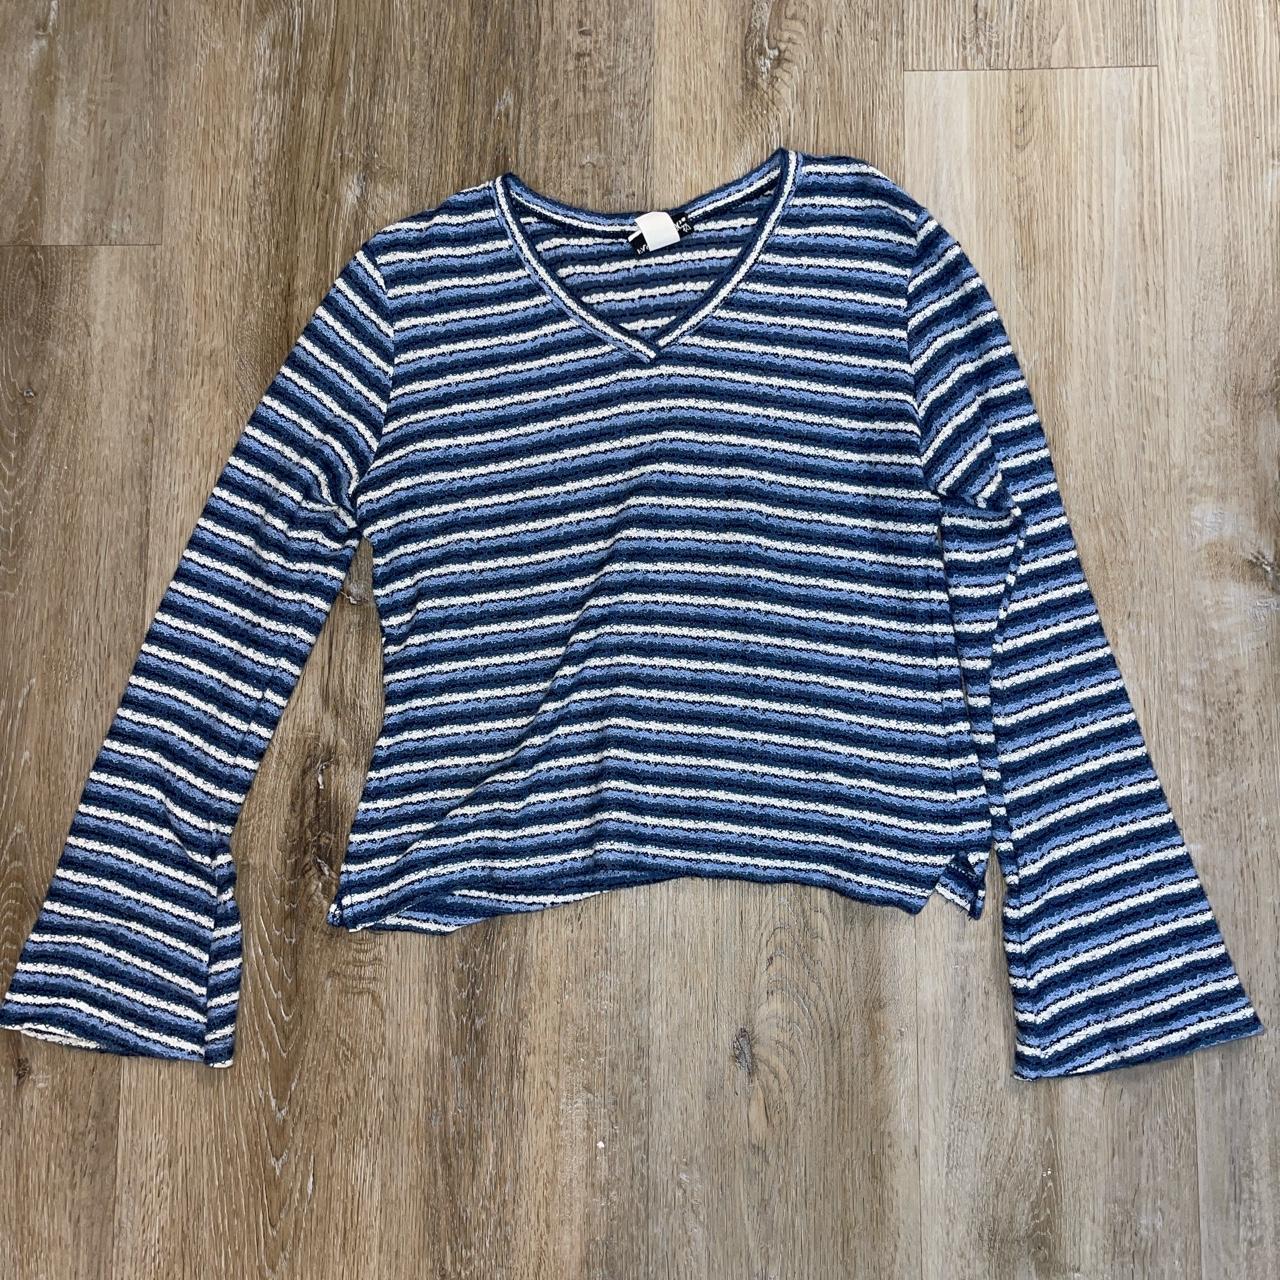 Fashion Baby Women's Blue and White Jumper